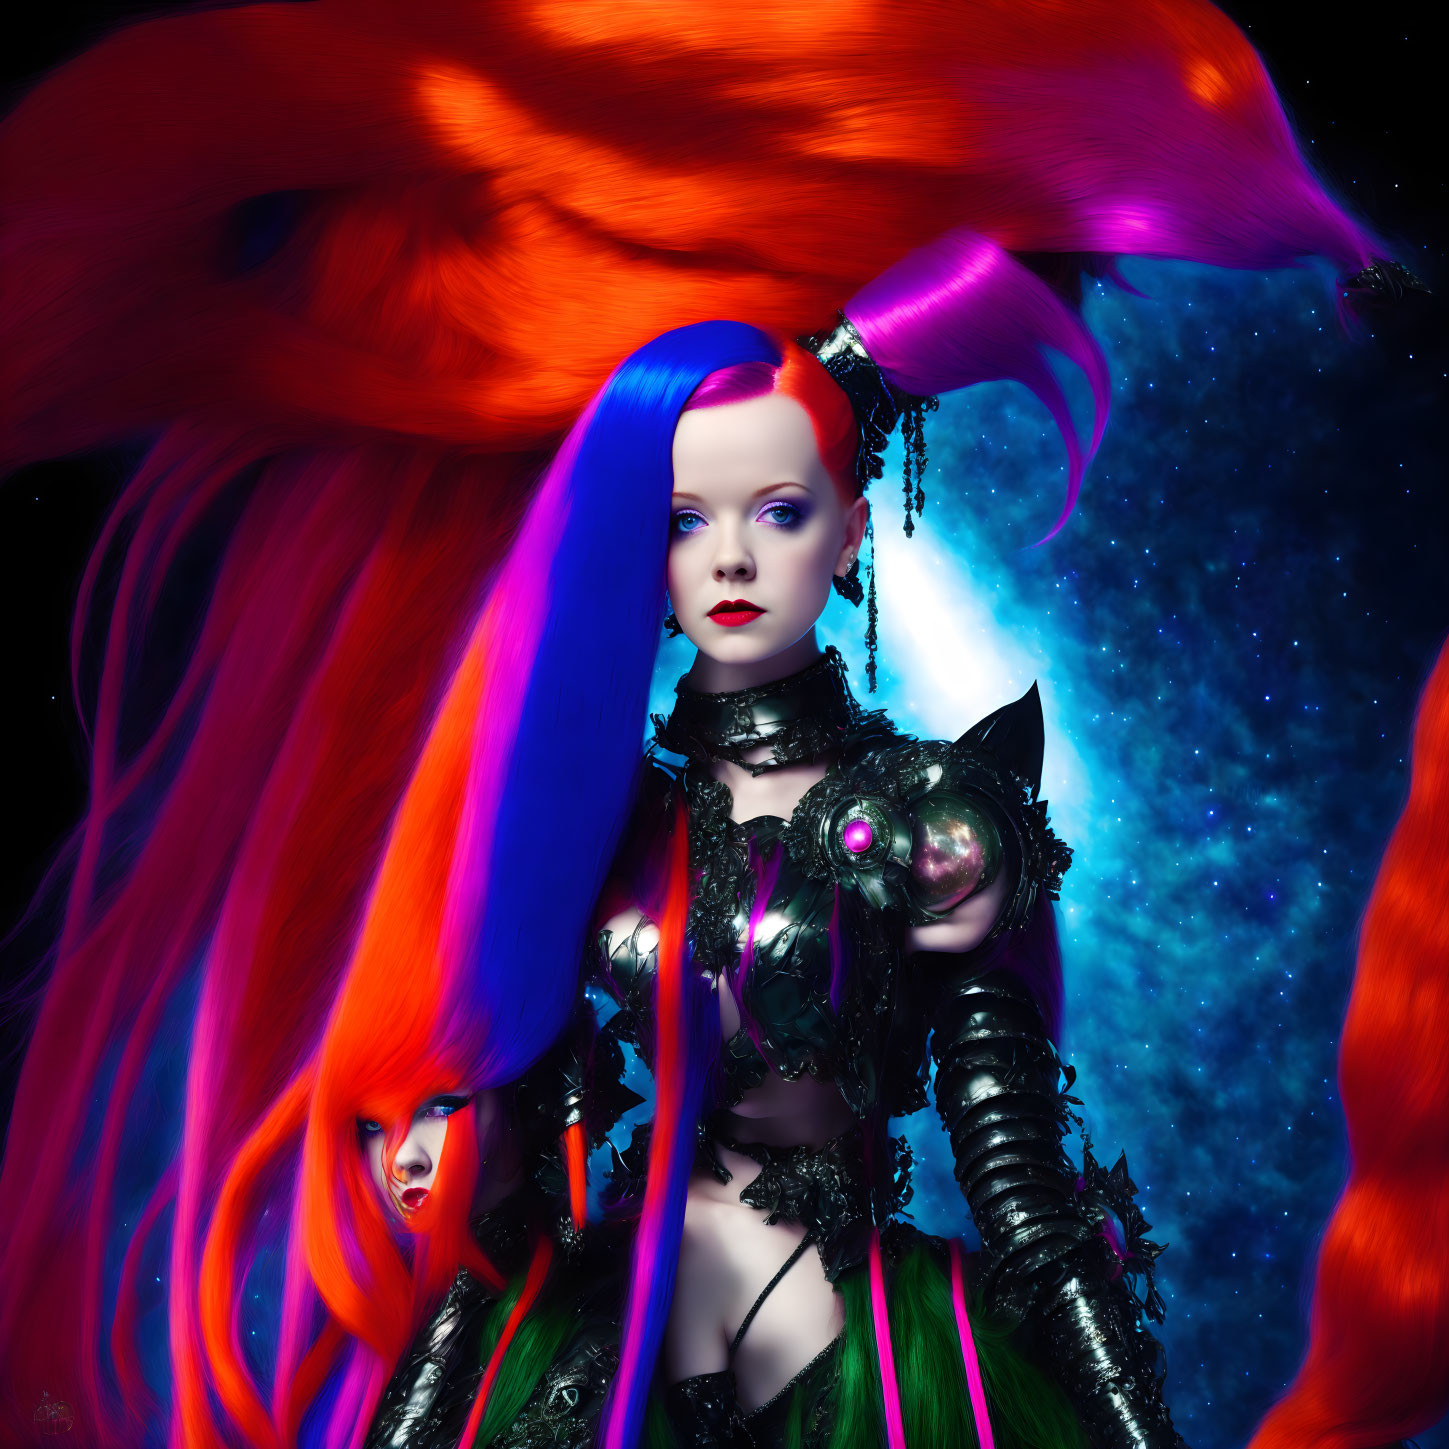 Colorful fantasy character with orange hair in black armor on space backdrop